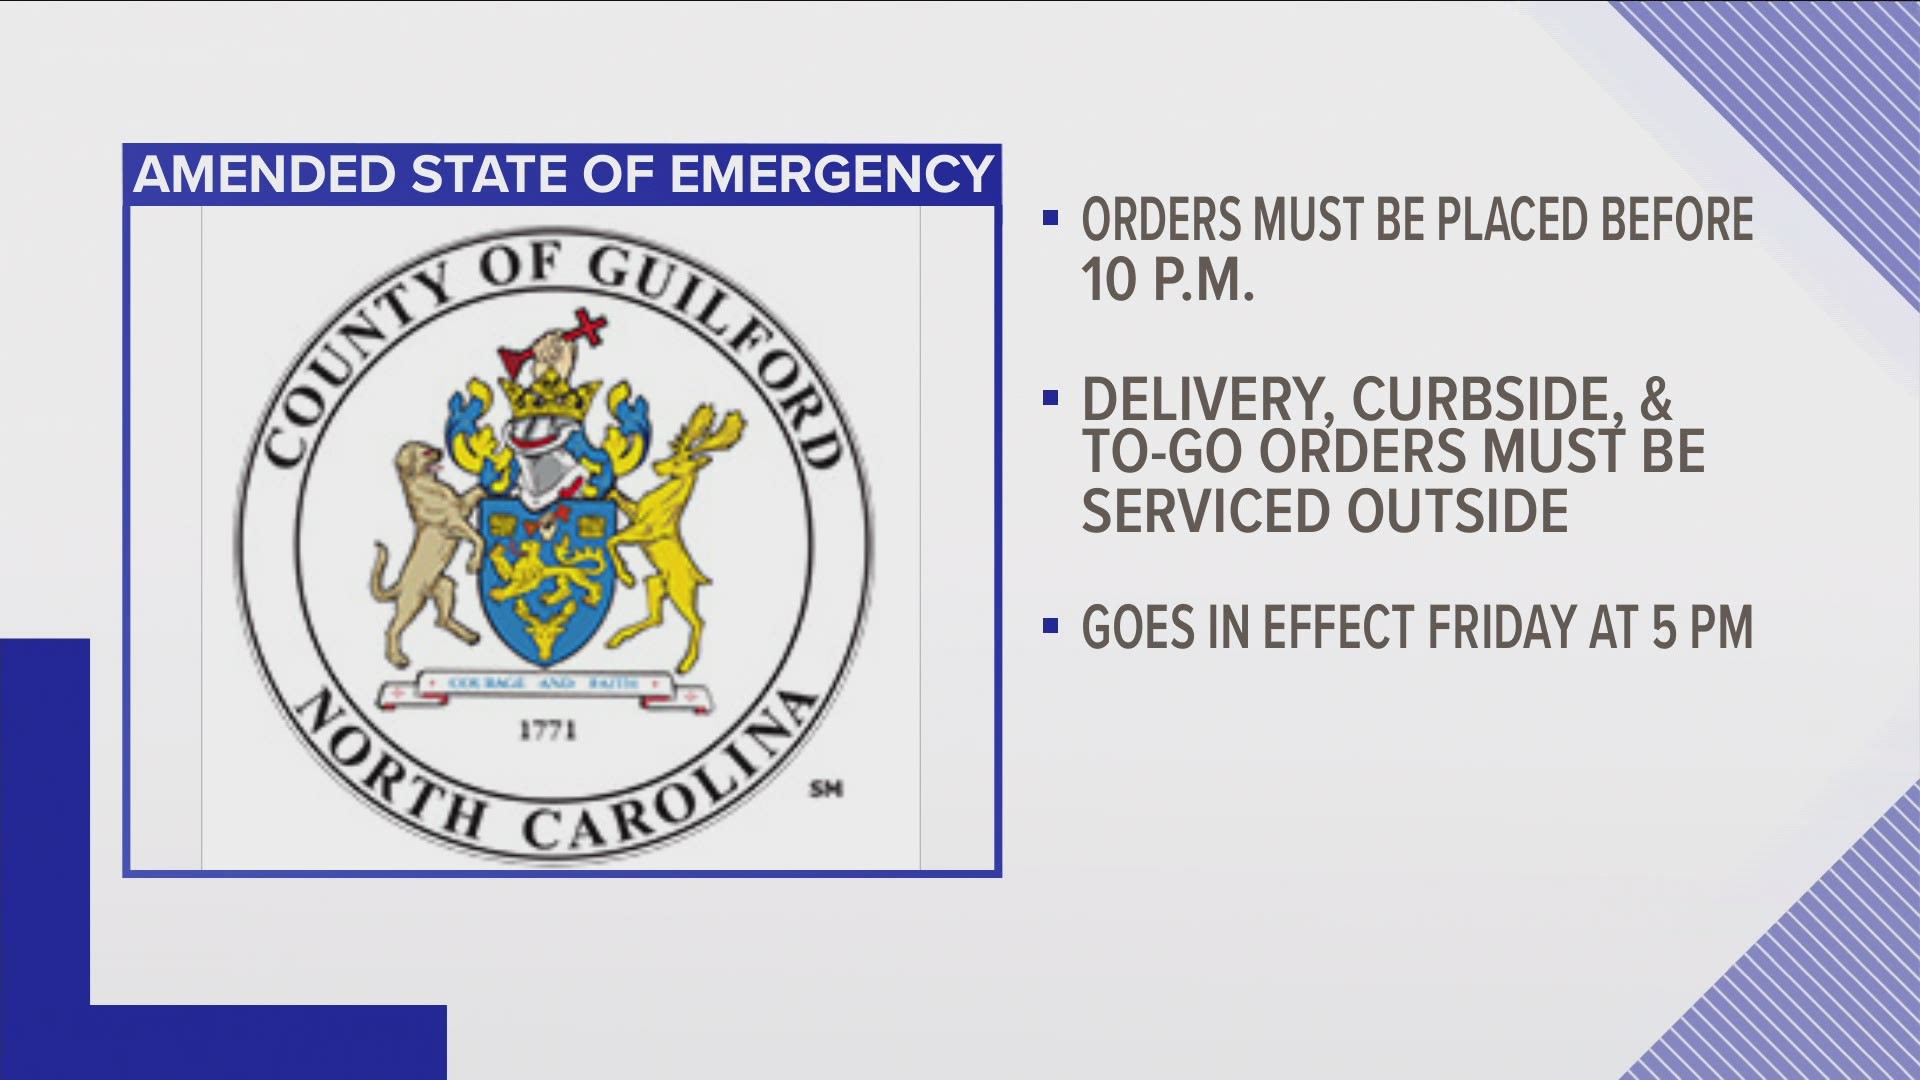 Guilford County Board of Commissioners amended the state of emergency to address the issue of customers in restaurants after curfew.